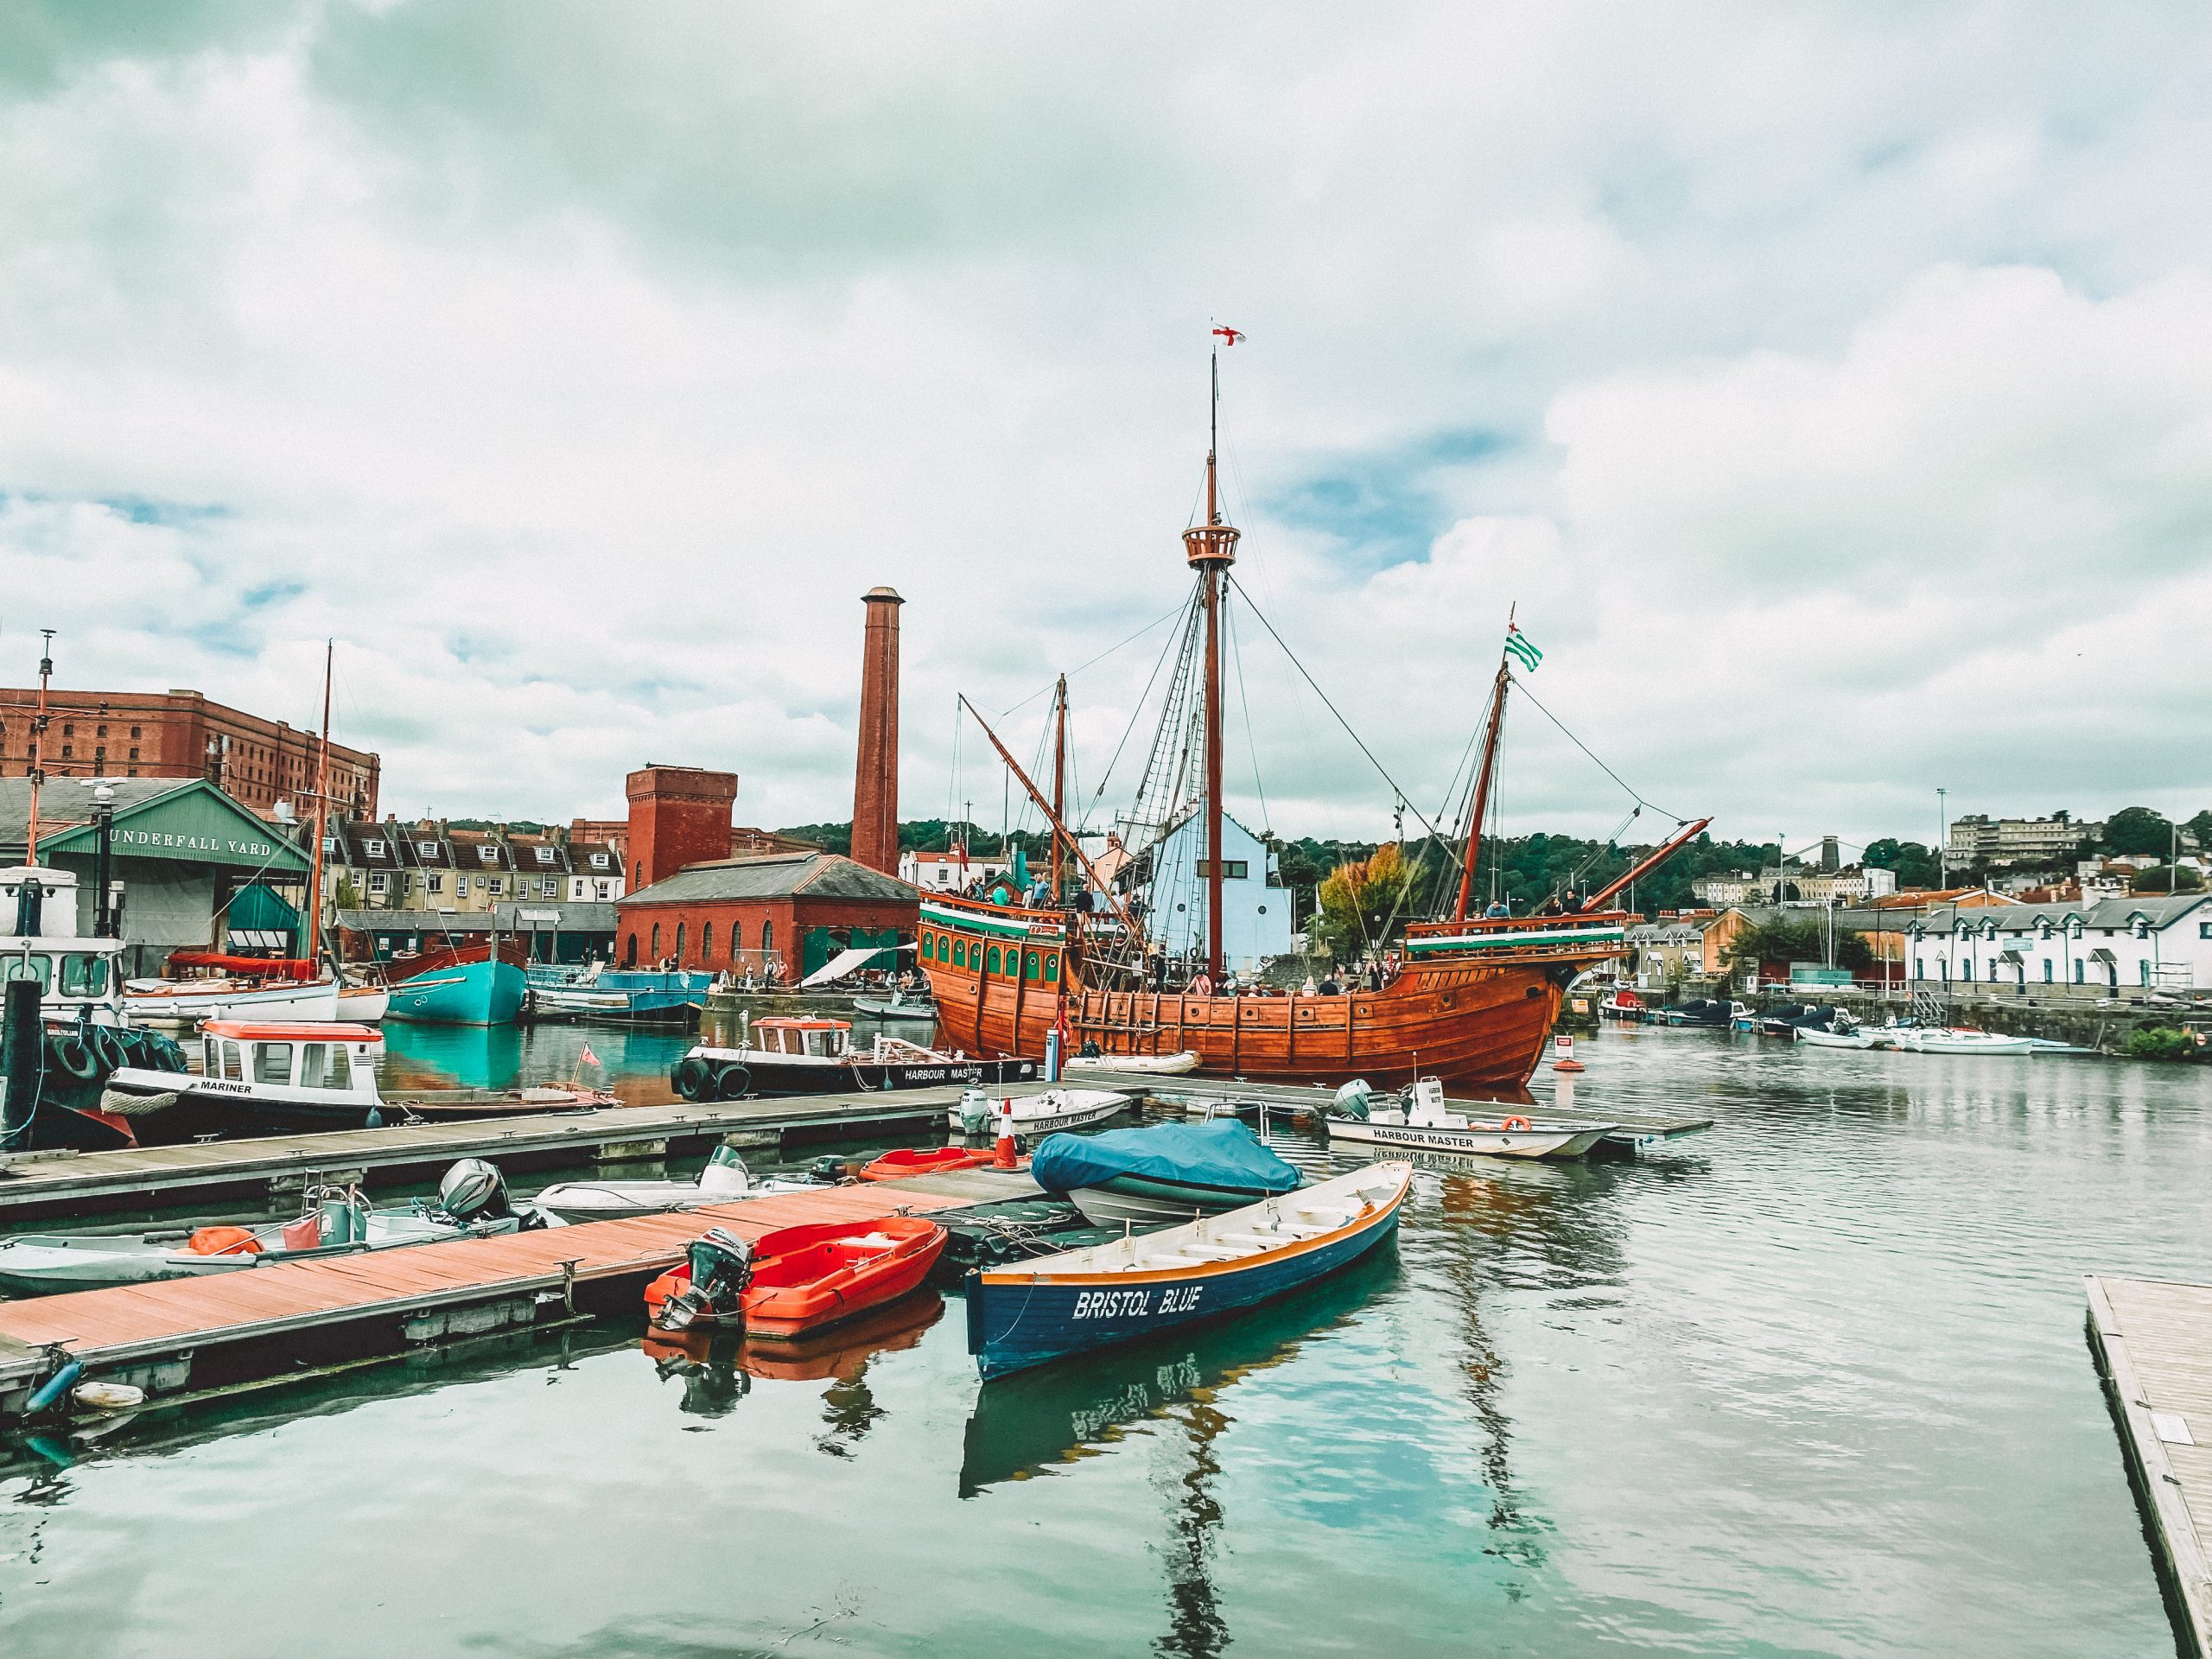 A harbour with an old wooden pirate ship, life boats and small rowing boats, with boat yards and a mill in the background.